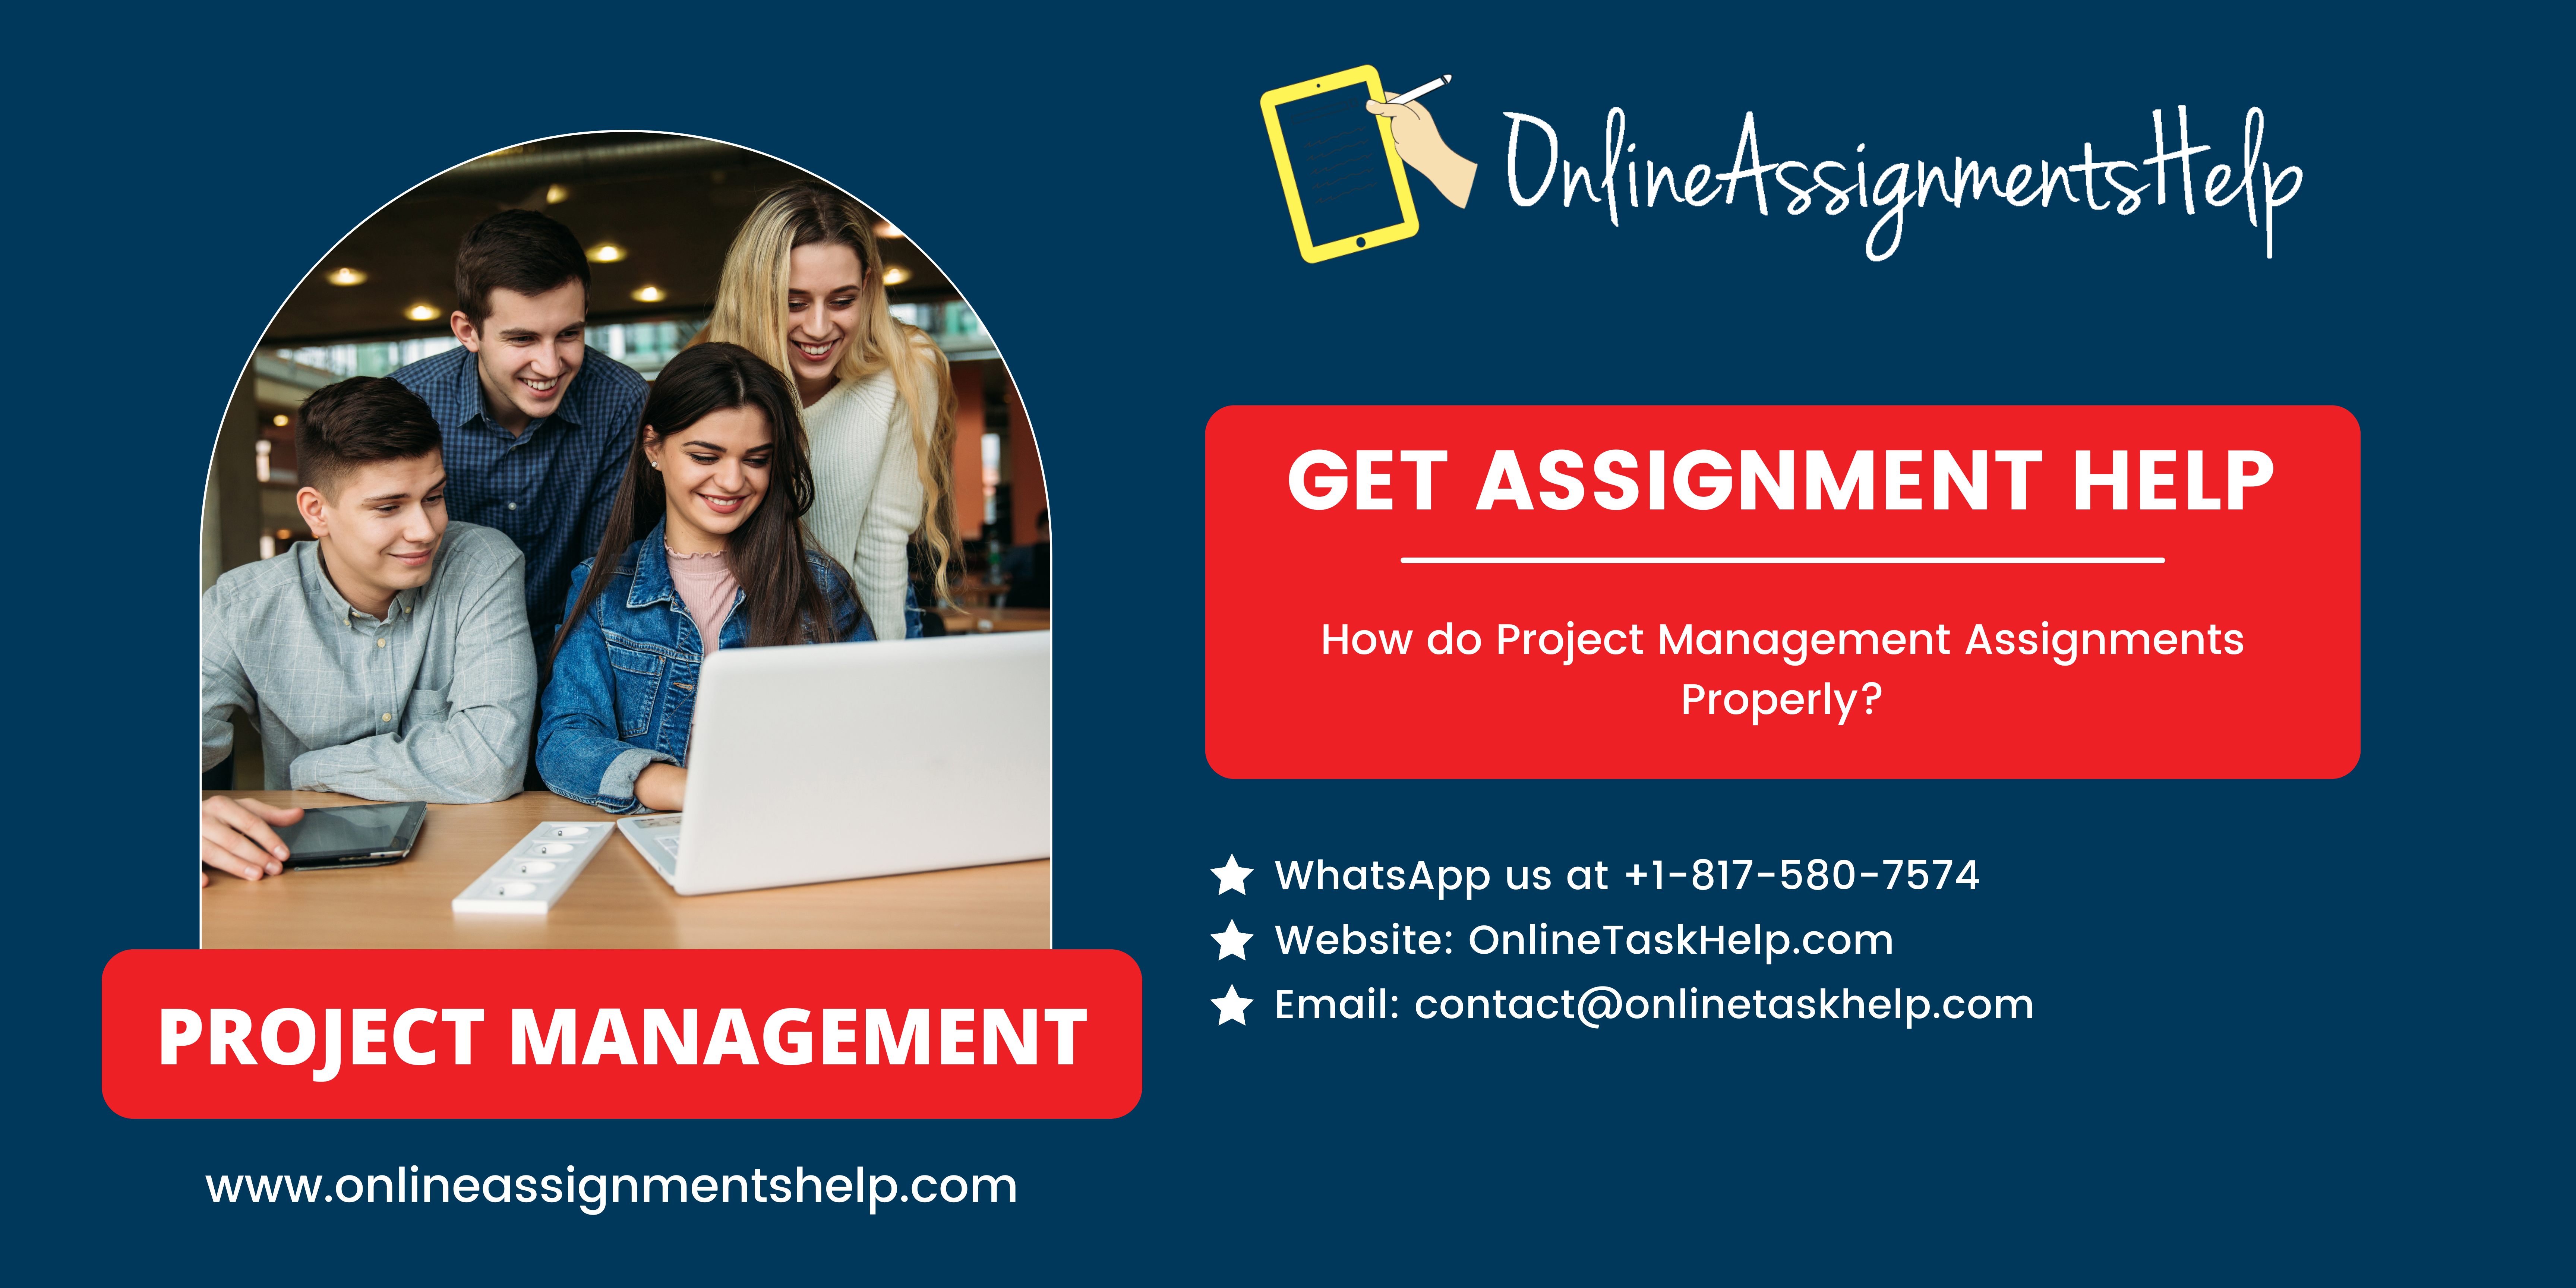 How do Project Management Assignments Properly?